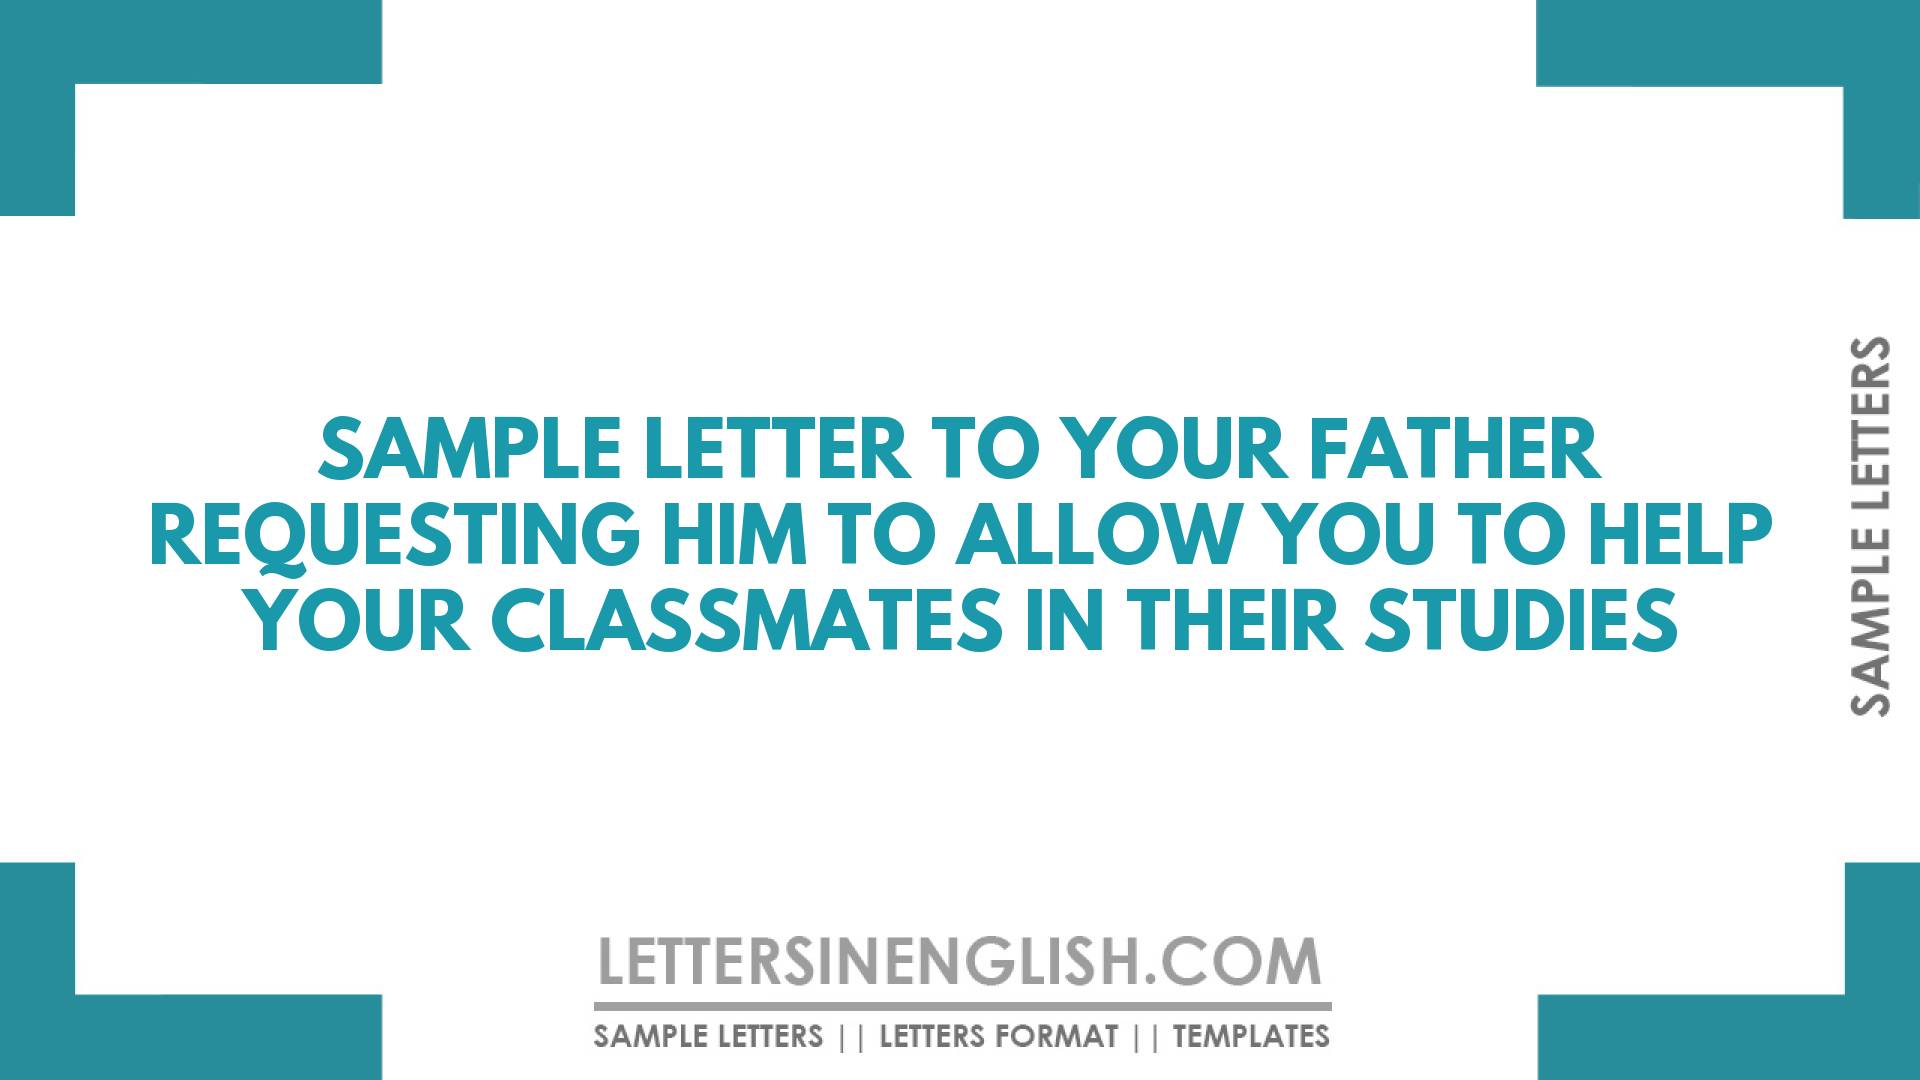 Sample Letter to Your Father Requesting Him to Allow You to Help Your Classmates in Their Studies